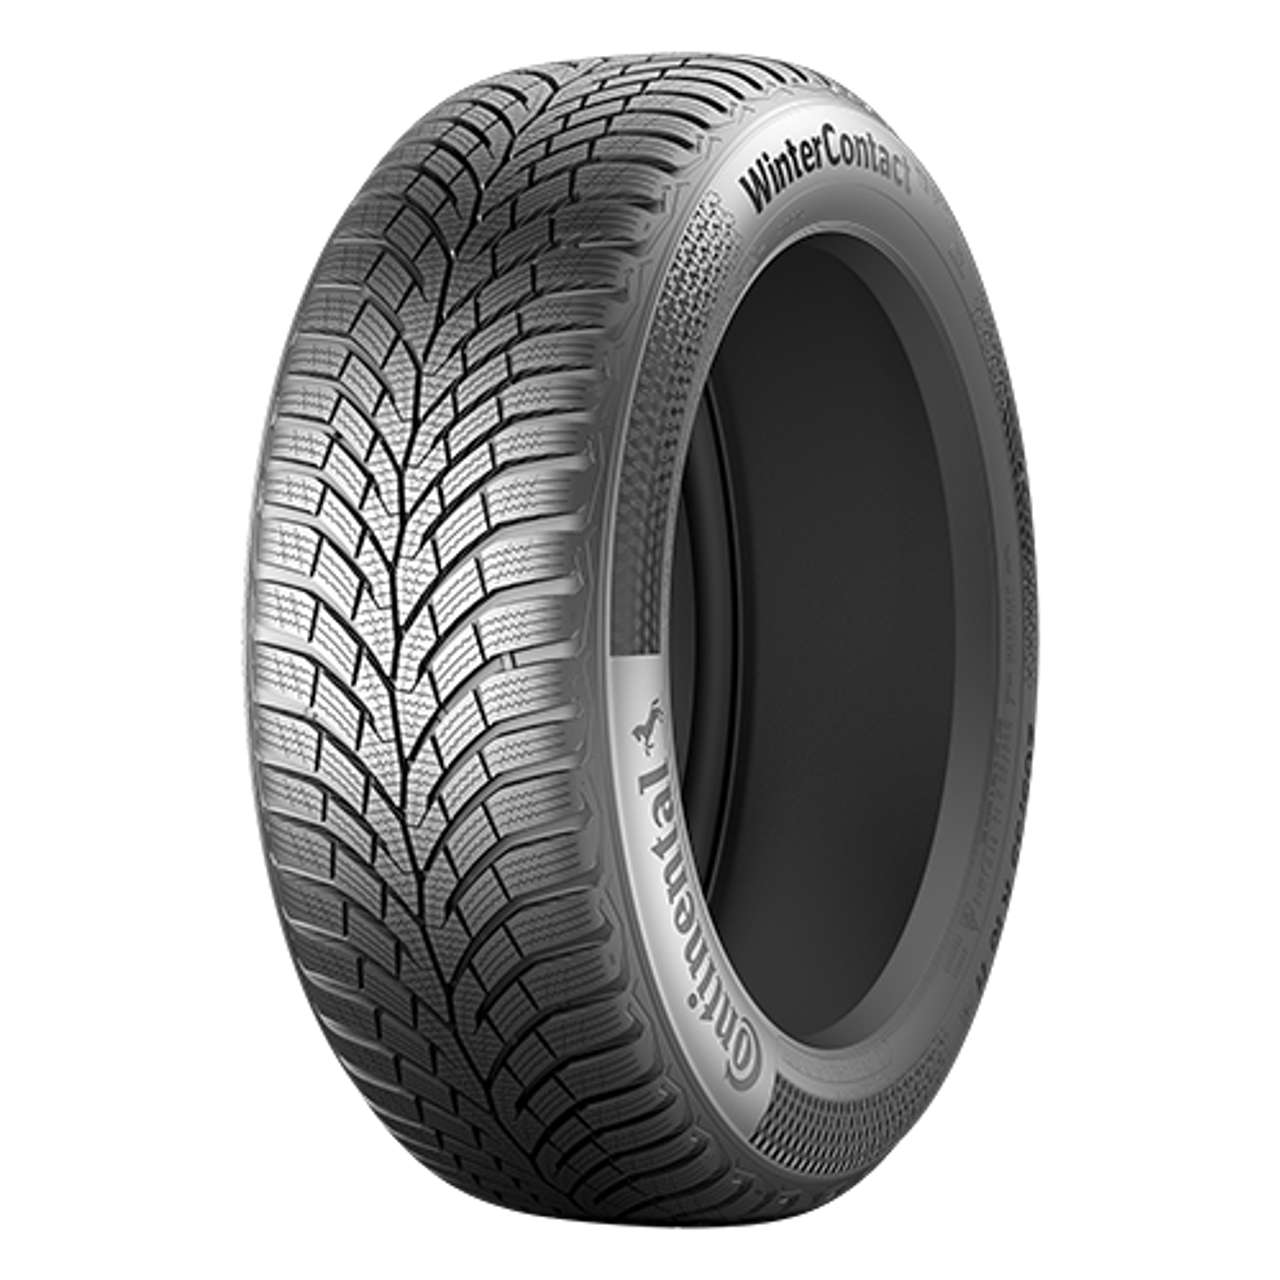 CONTINENTAL WINTERCONTACT TS 870 (EVc) 195/70R16 94H FR BSW von Continental